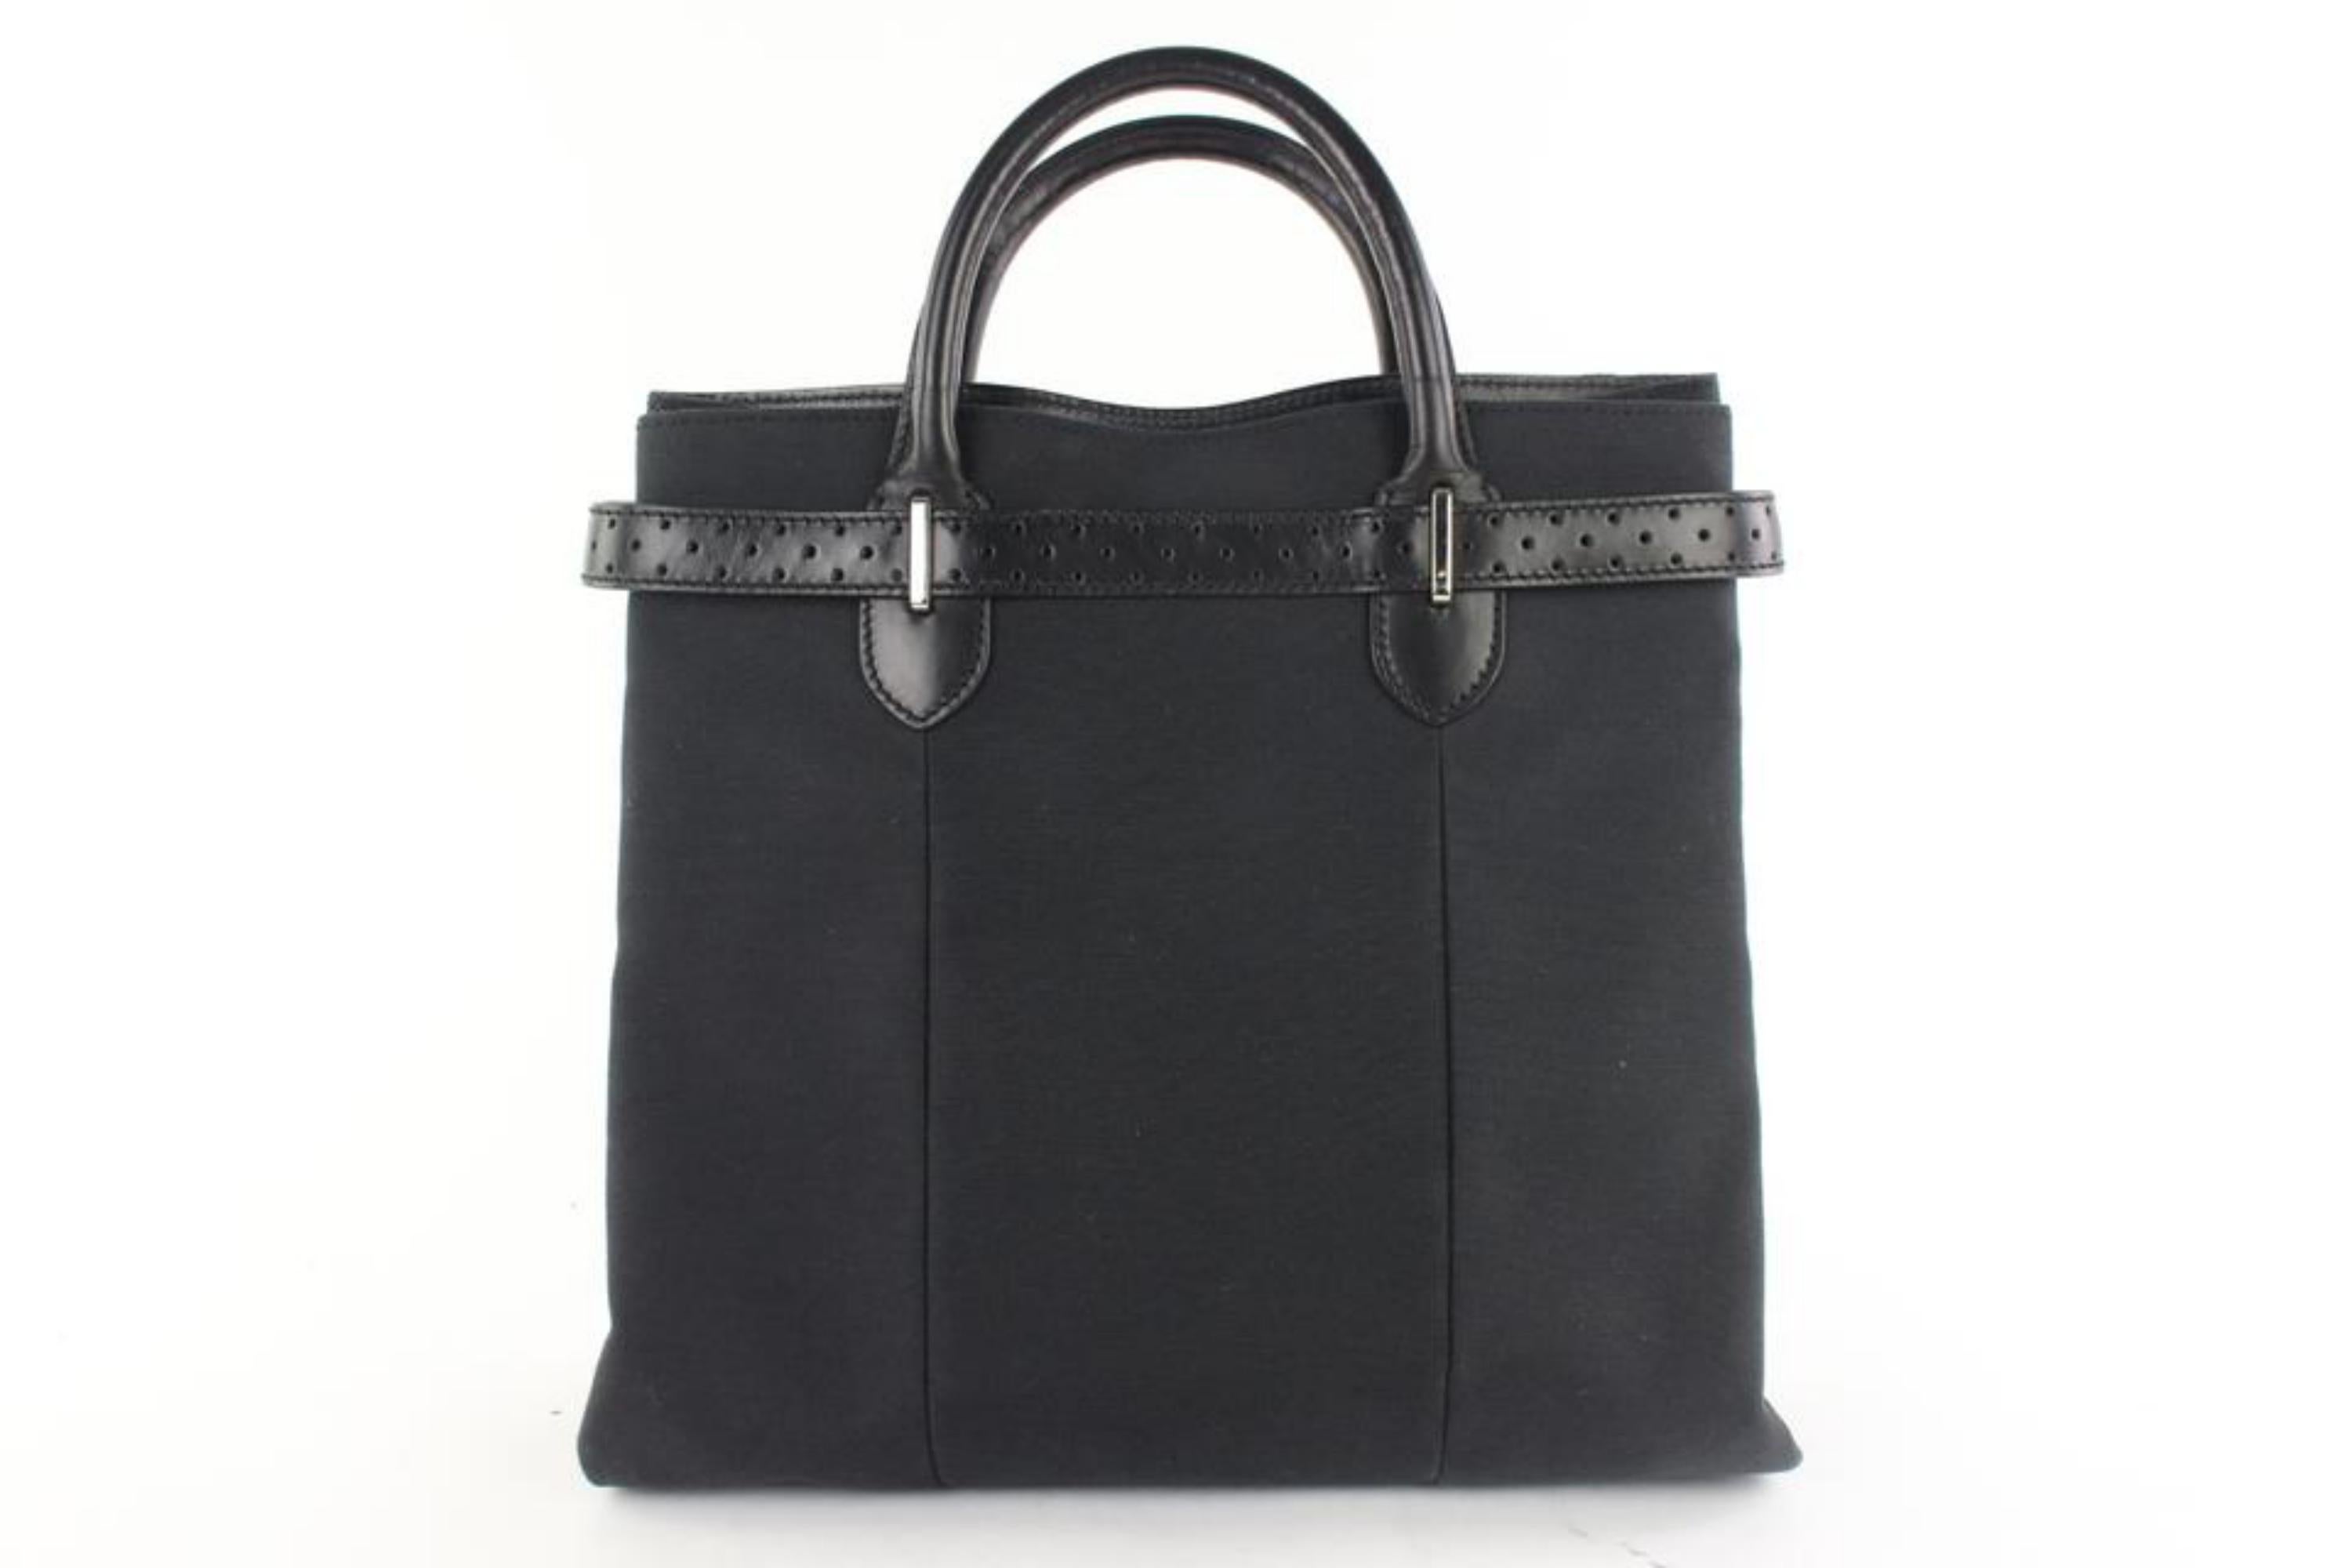 Gucci Perforated Belt 14gz0904 Black Canvas Tote For Sale 4